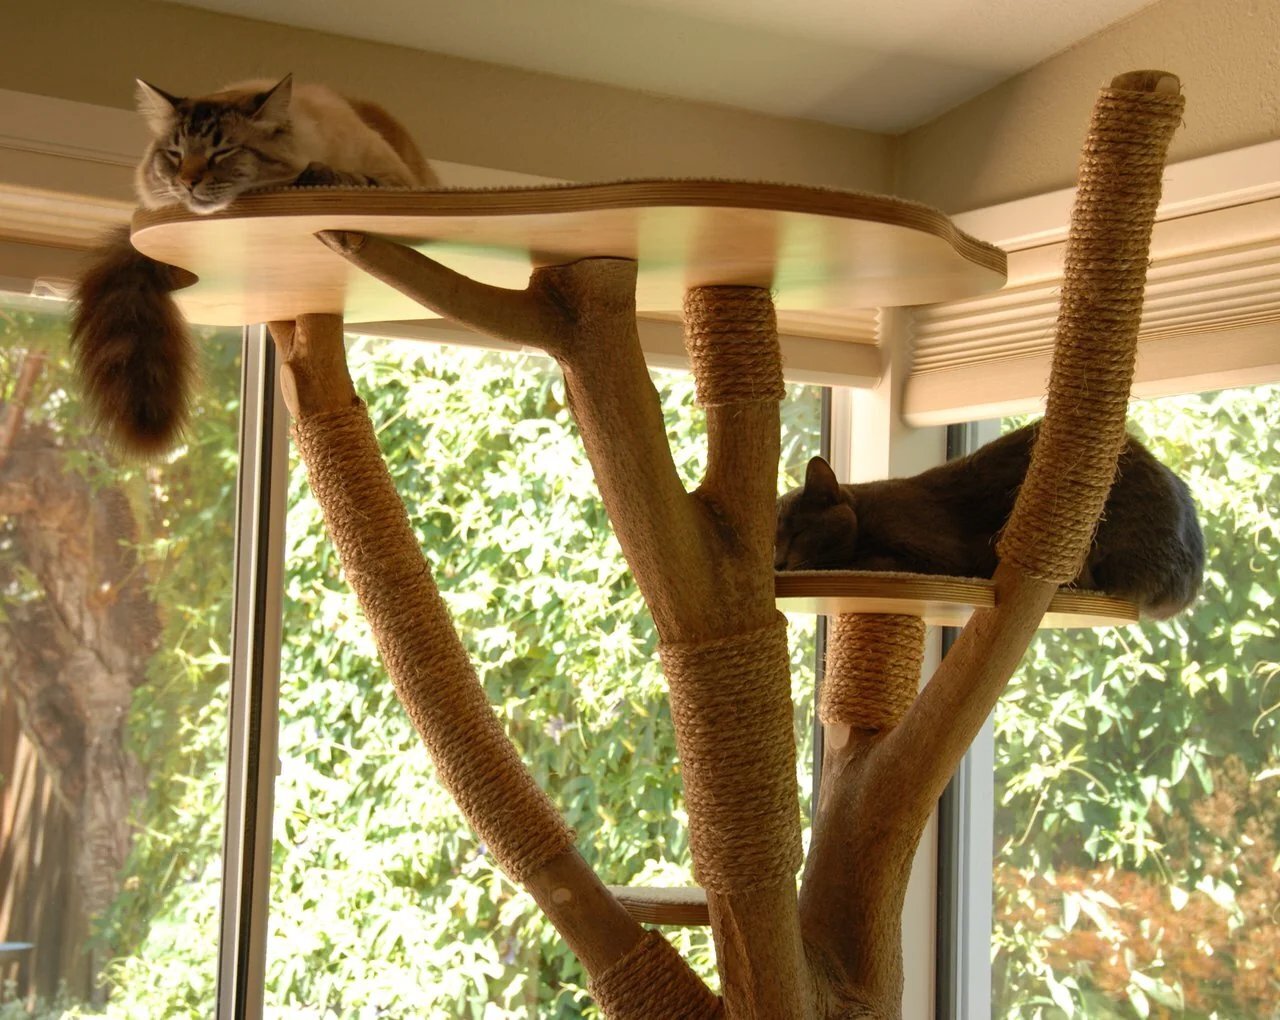 How To Make A Cat Tree